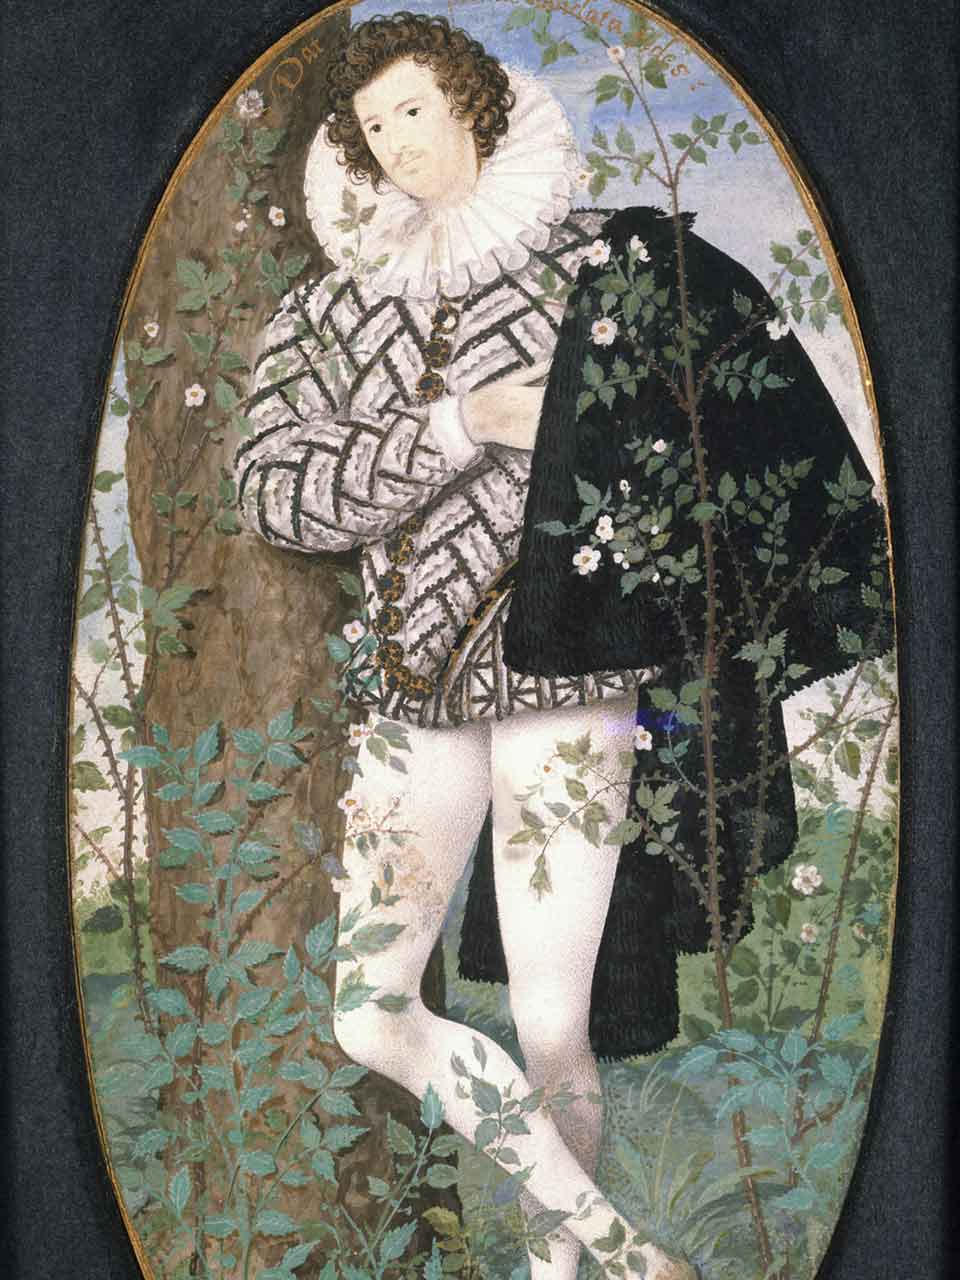 Exposition Mode masculine V&A Nicholas Hilliard Young Man among Roses c.1587 © Victoria and Albert Museum London